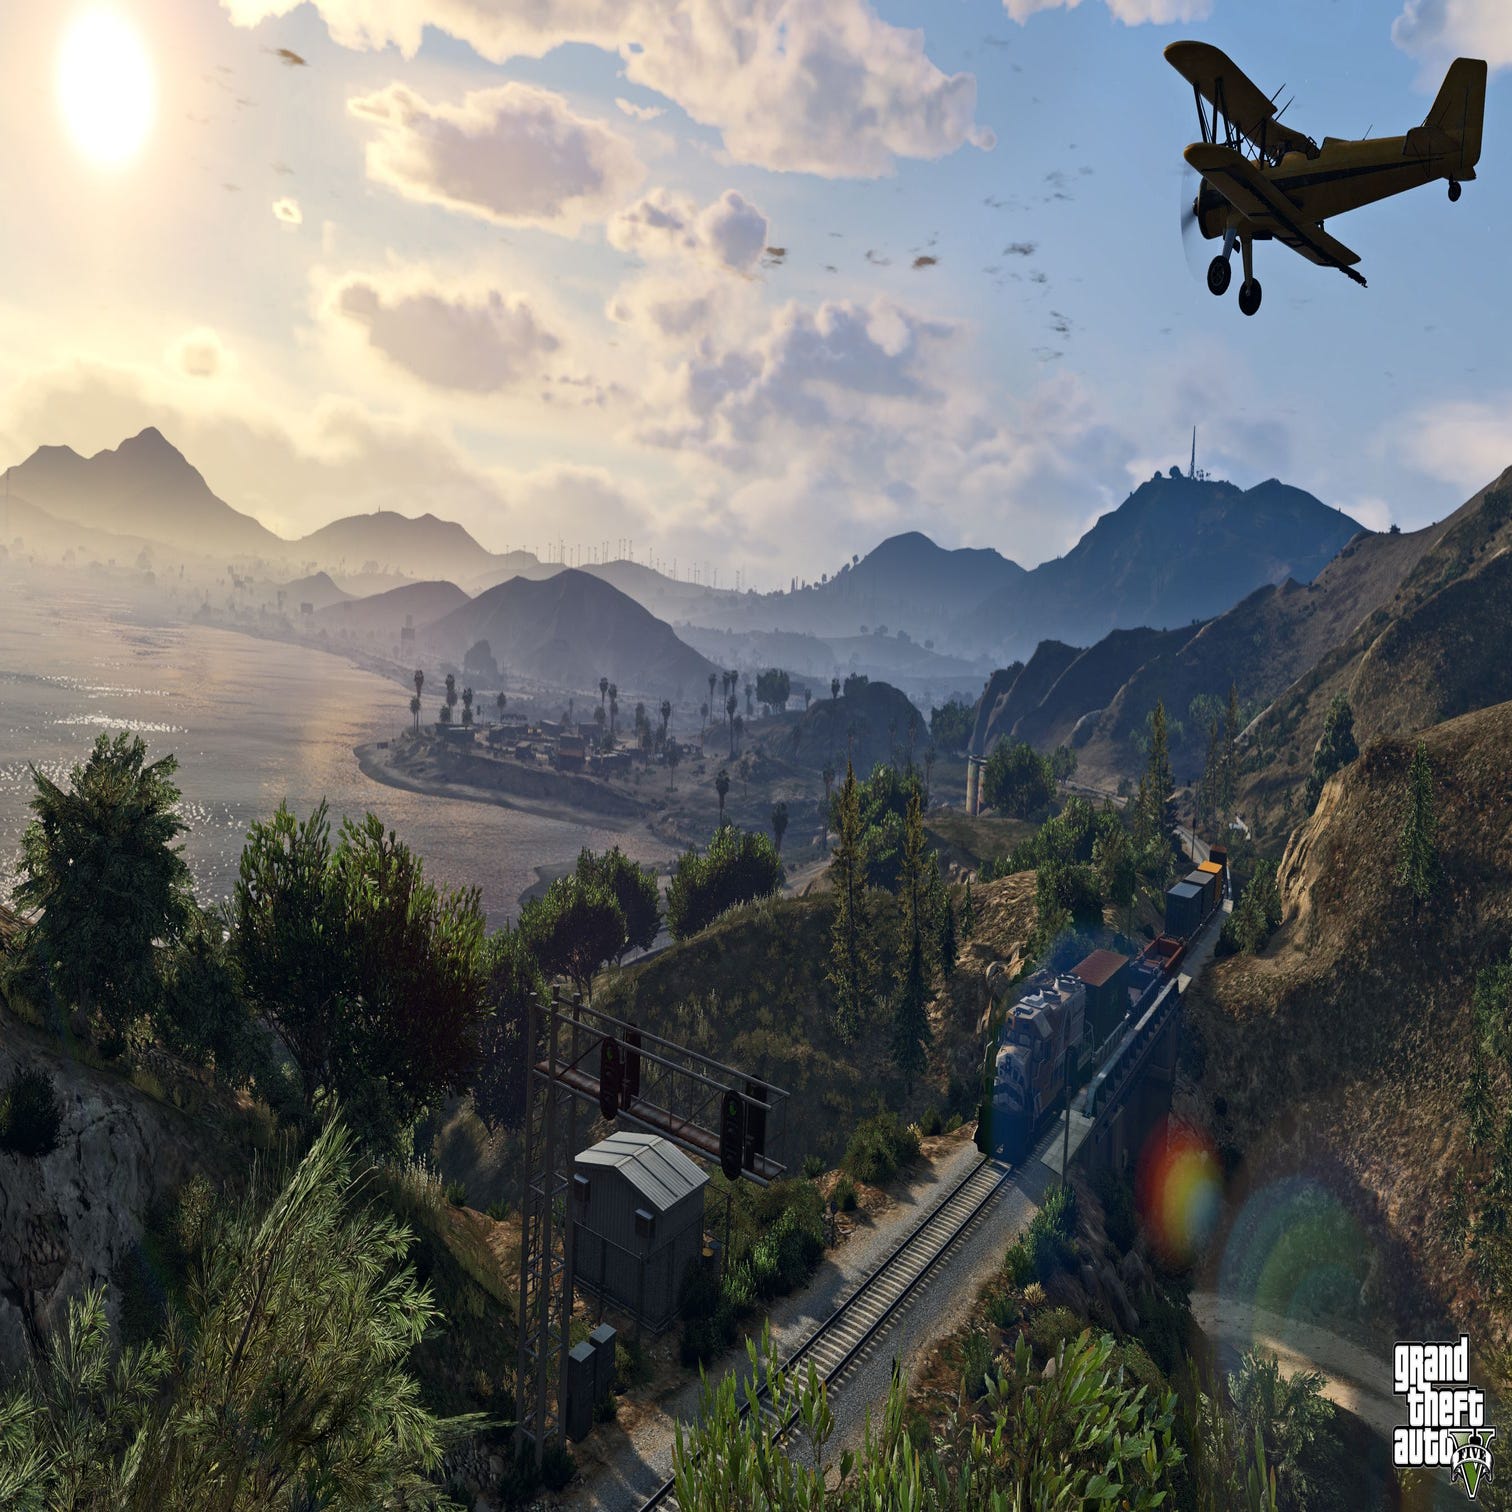 LINDAB: GTA 5 Cheats: All Cheat Codes, Tips, Tricks and Phone Numbers for  Grand Theft Auto 5 on PS4, PC, Xbox One